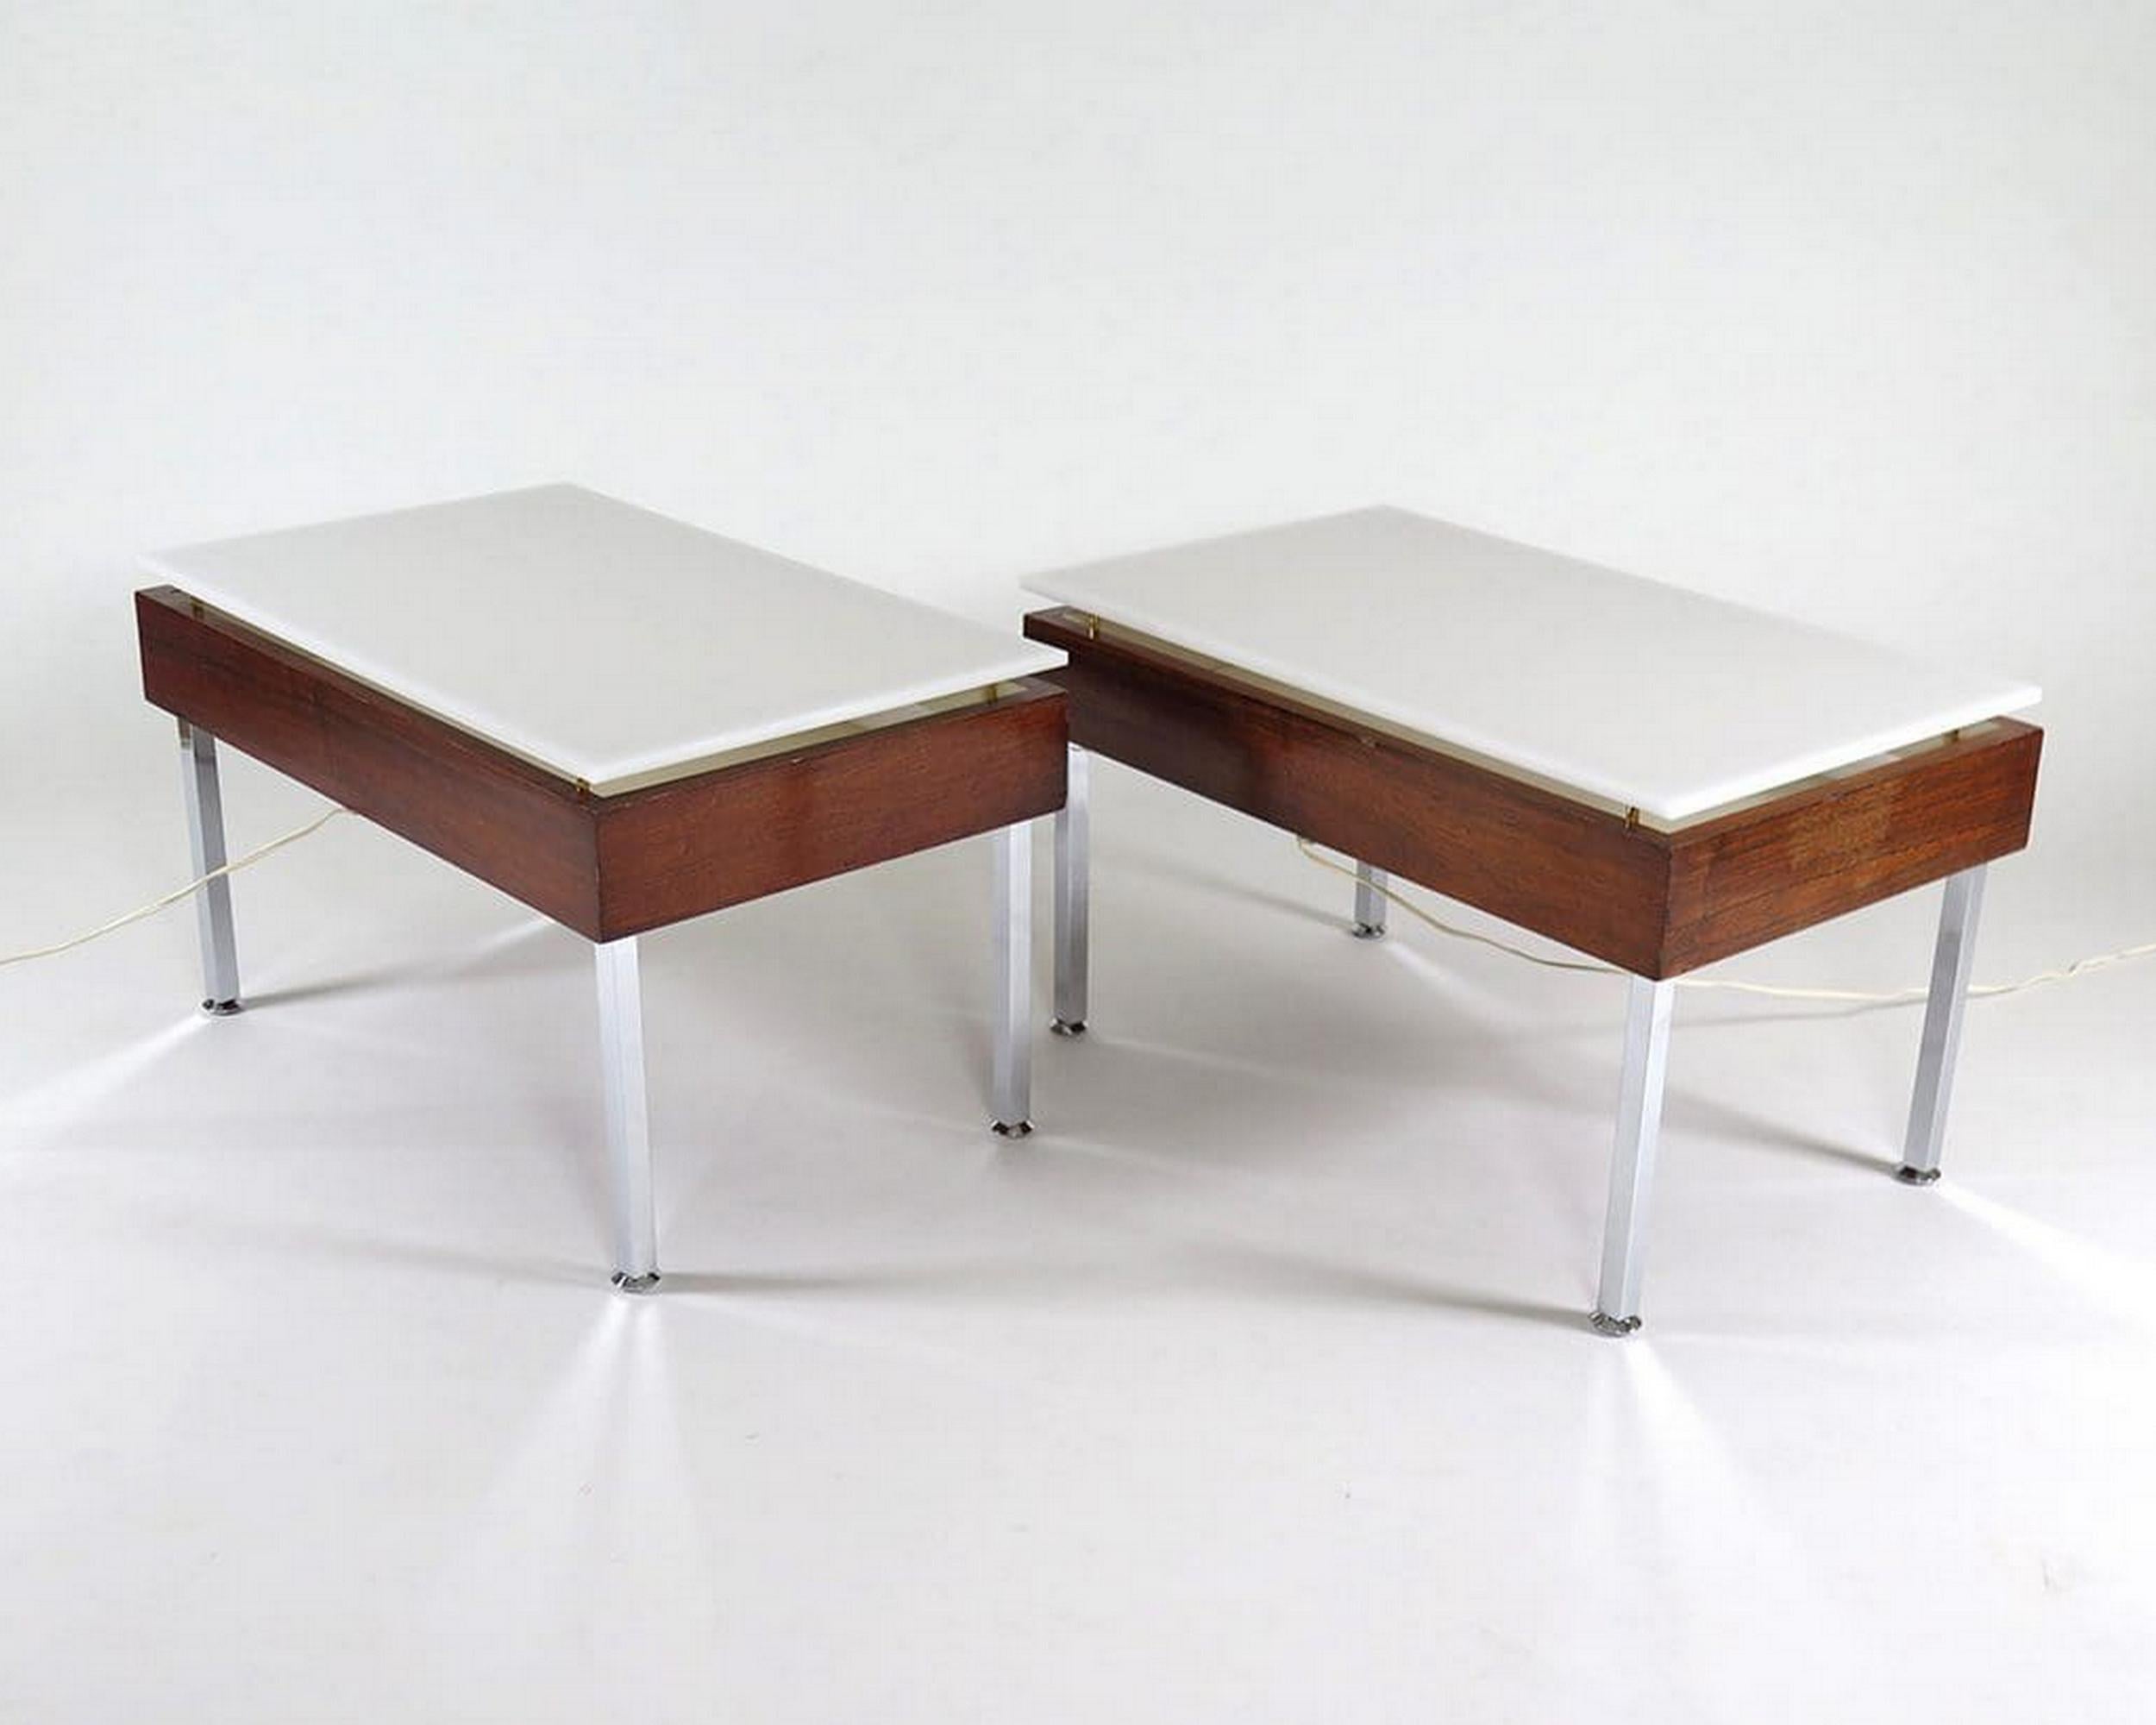 Plated Pair of luminous tables model G 30 by Joseph-André Motte Ed. Charron France 1958 For Sale